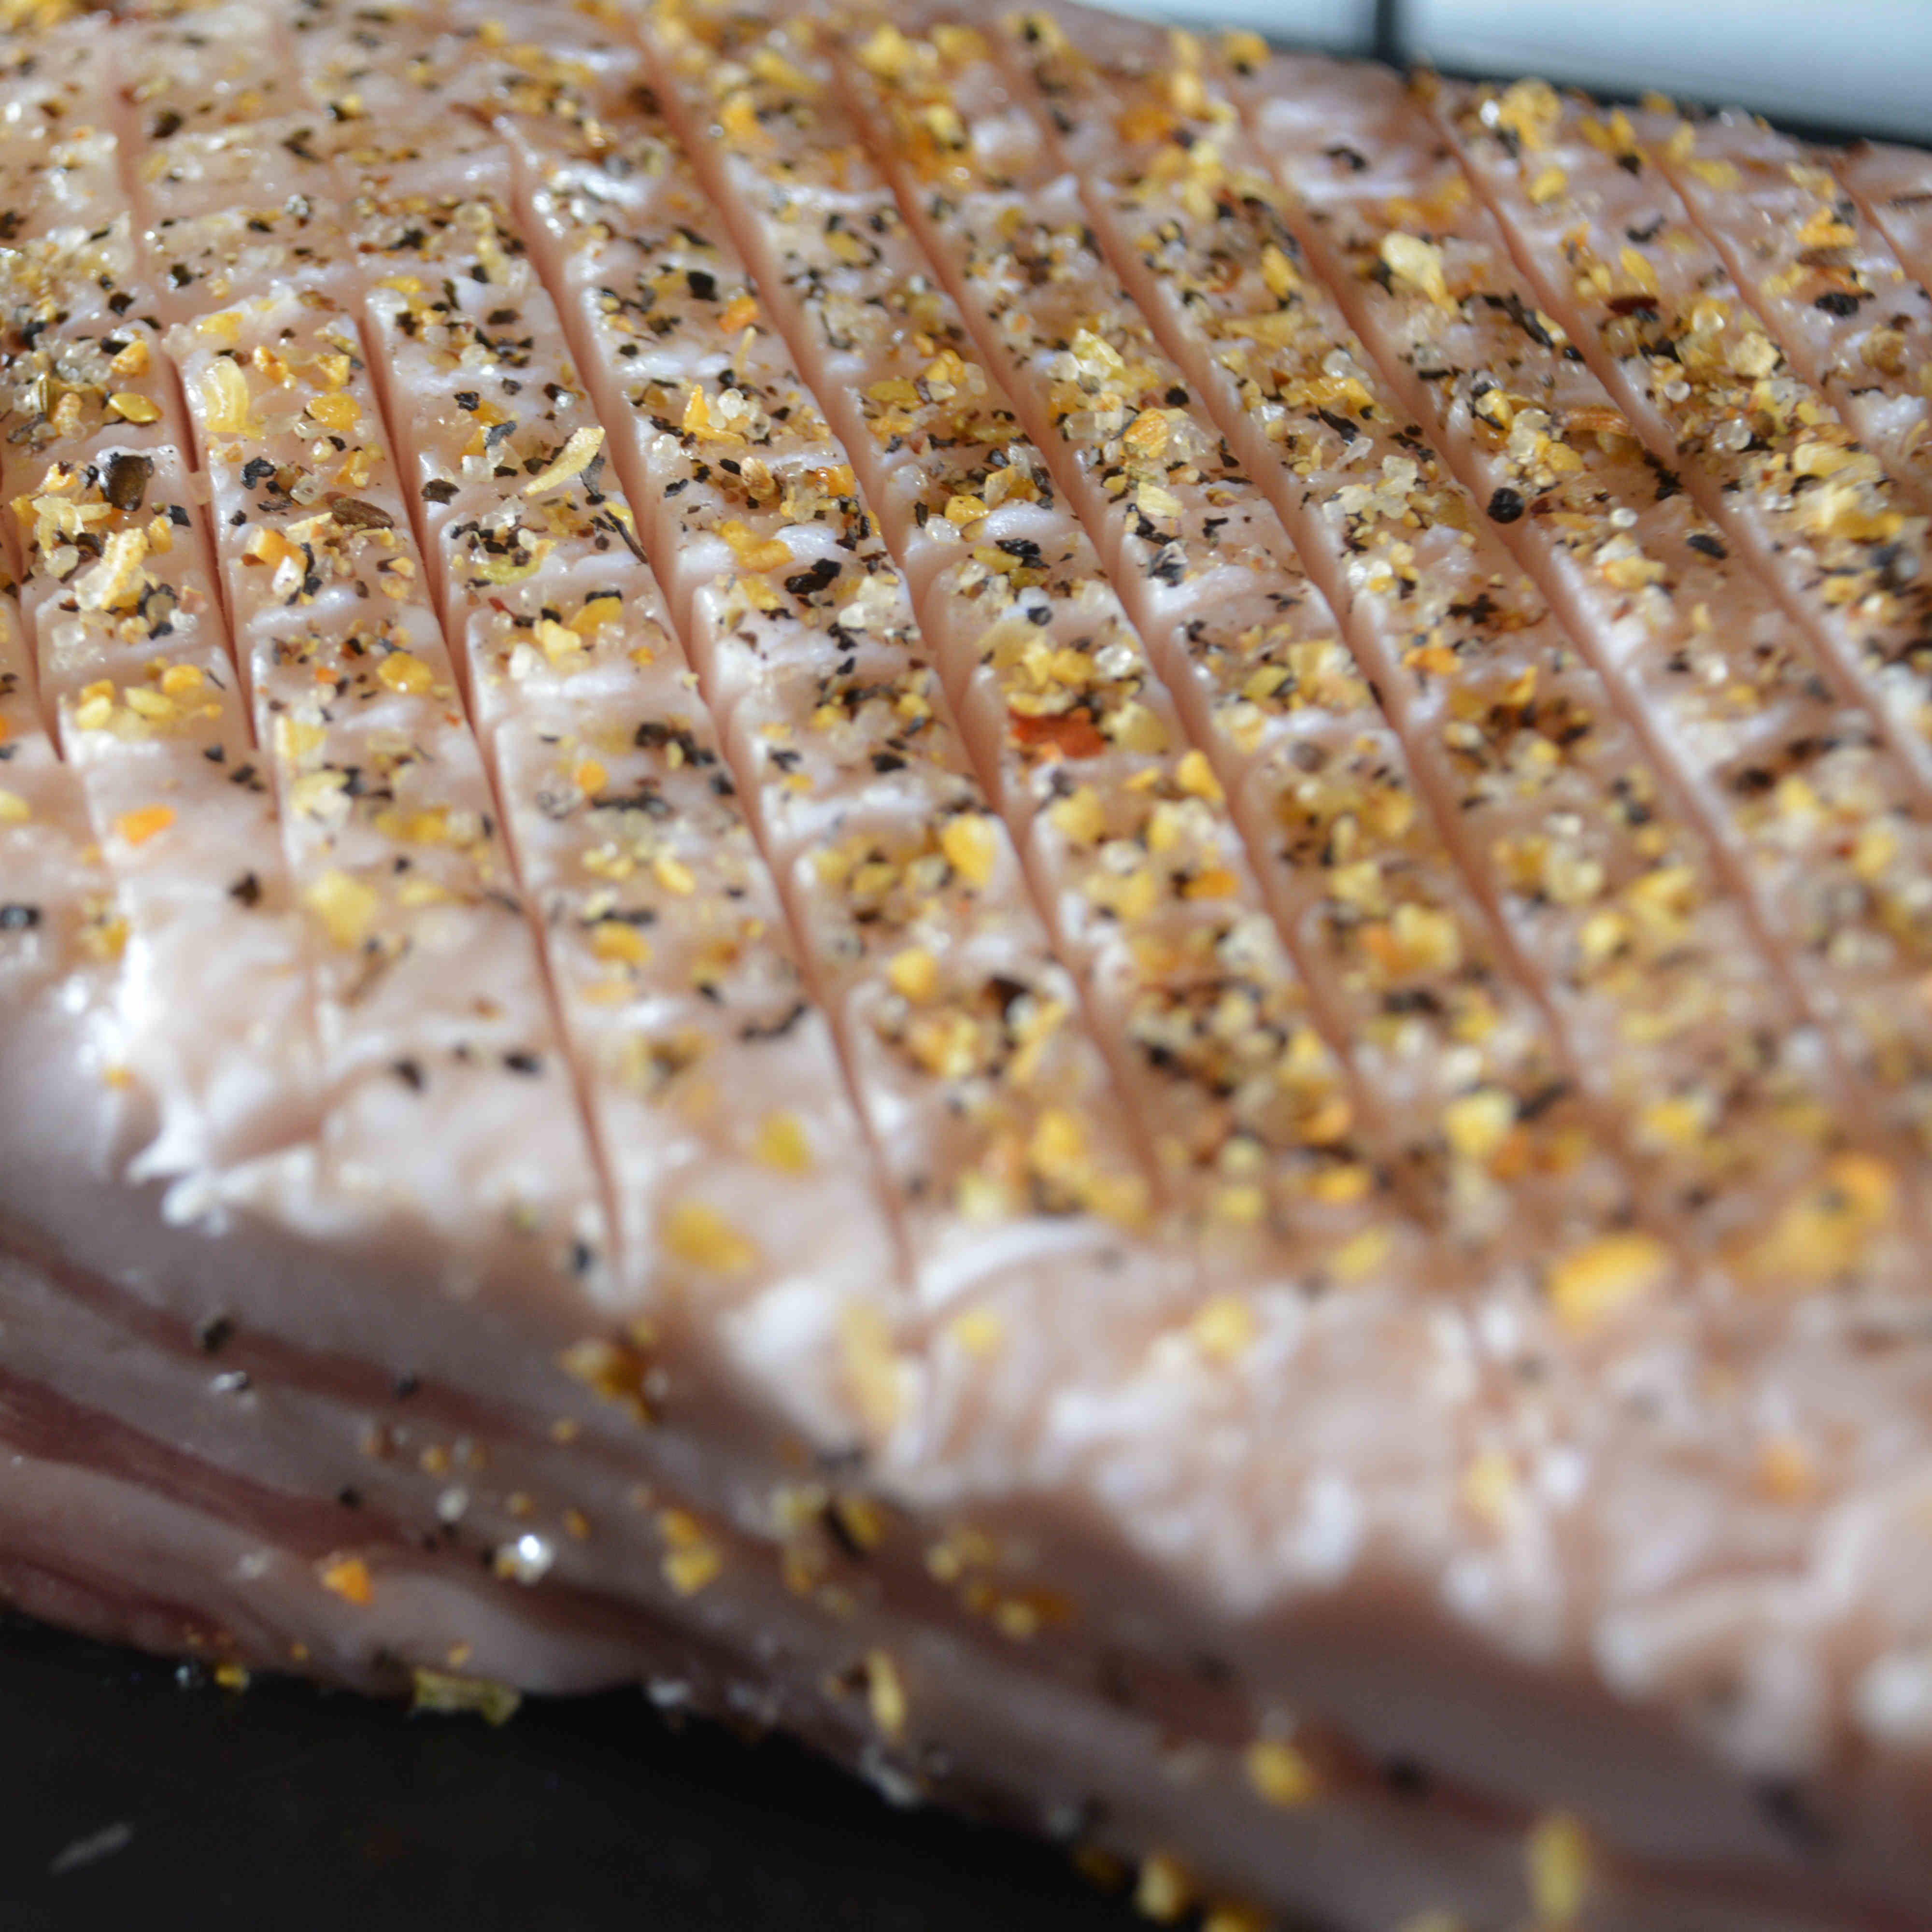 pork belly cooked on Cinder grill indoor grill precision cooker 